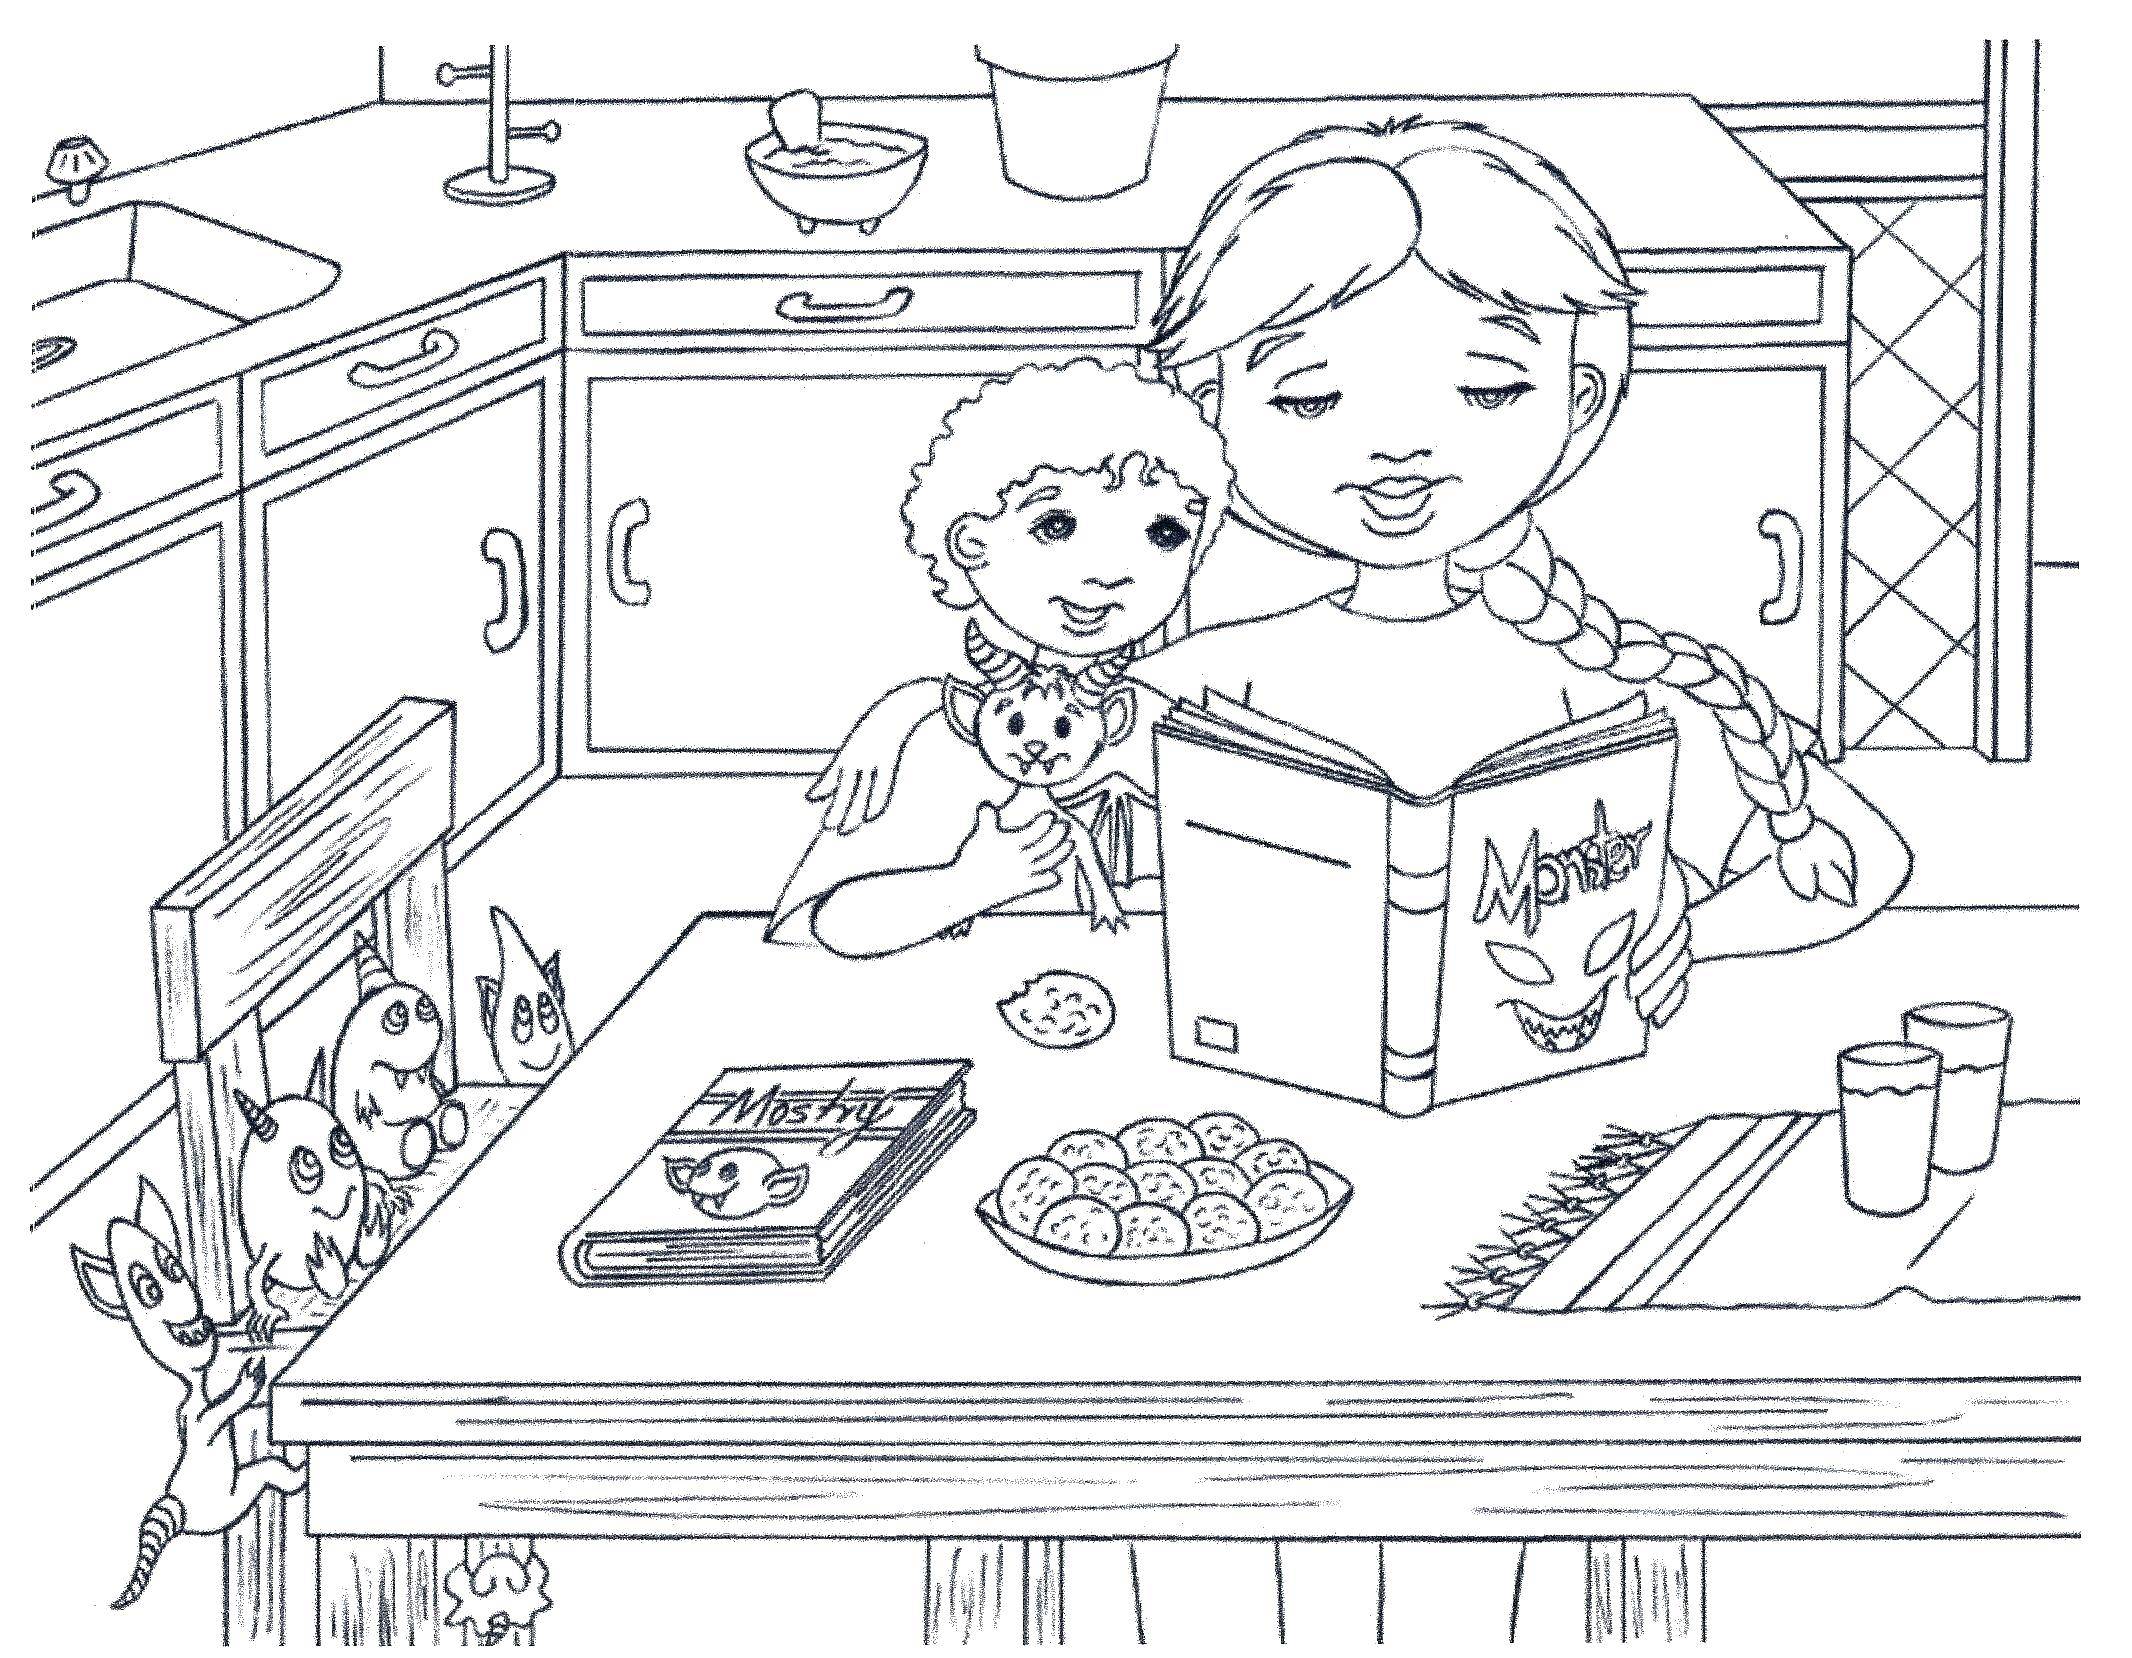 Coloring Mother reads book to son in the kitchen. Category Kitchen. Tags:  kitchen, book.